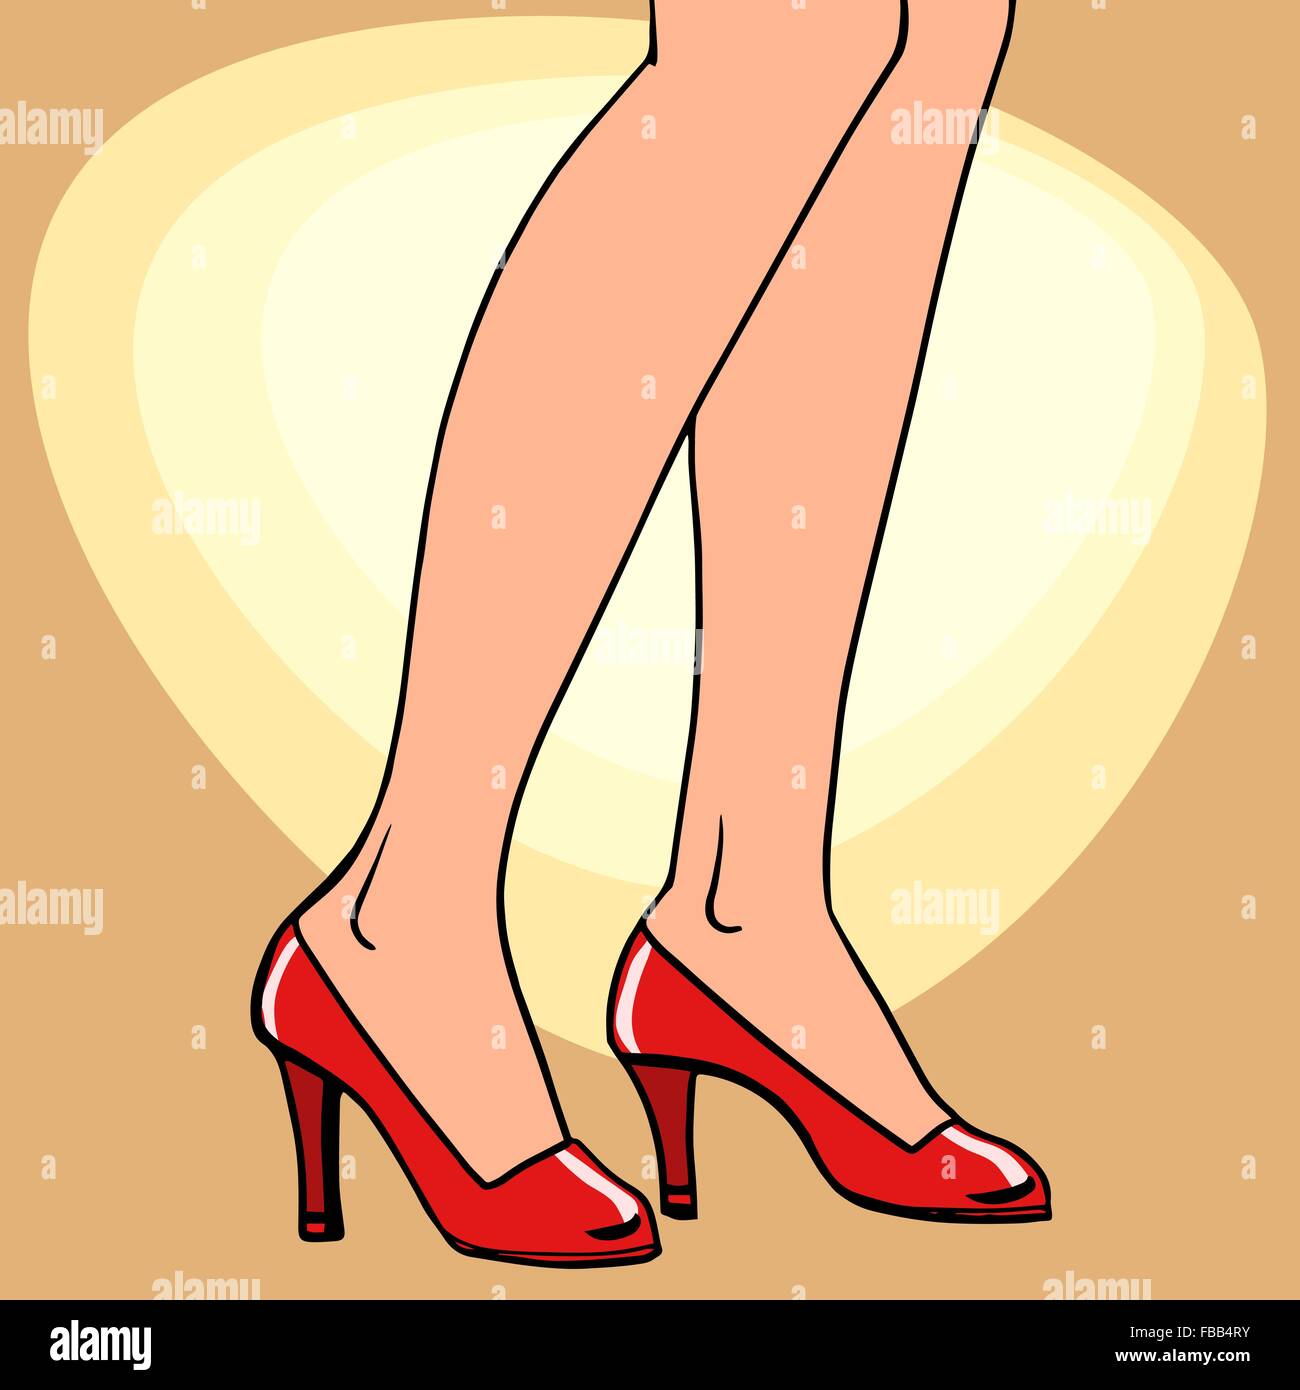 Female feet in shoes Stock Vector